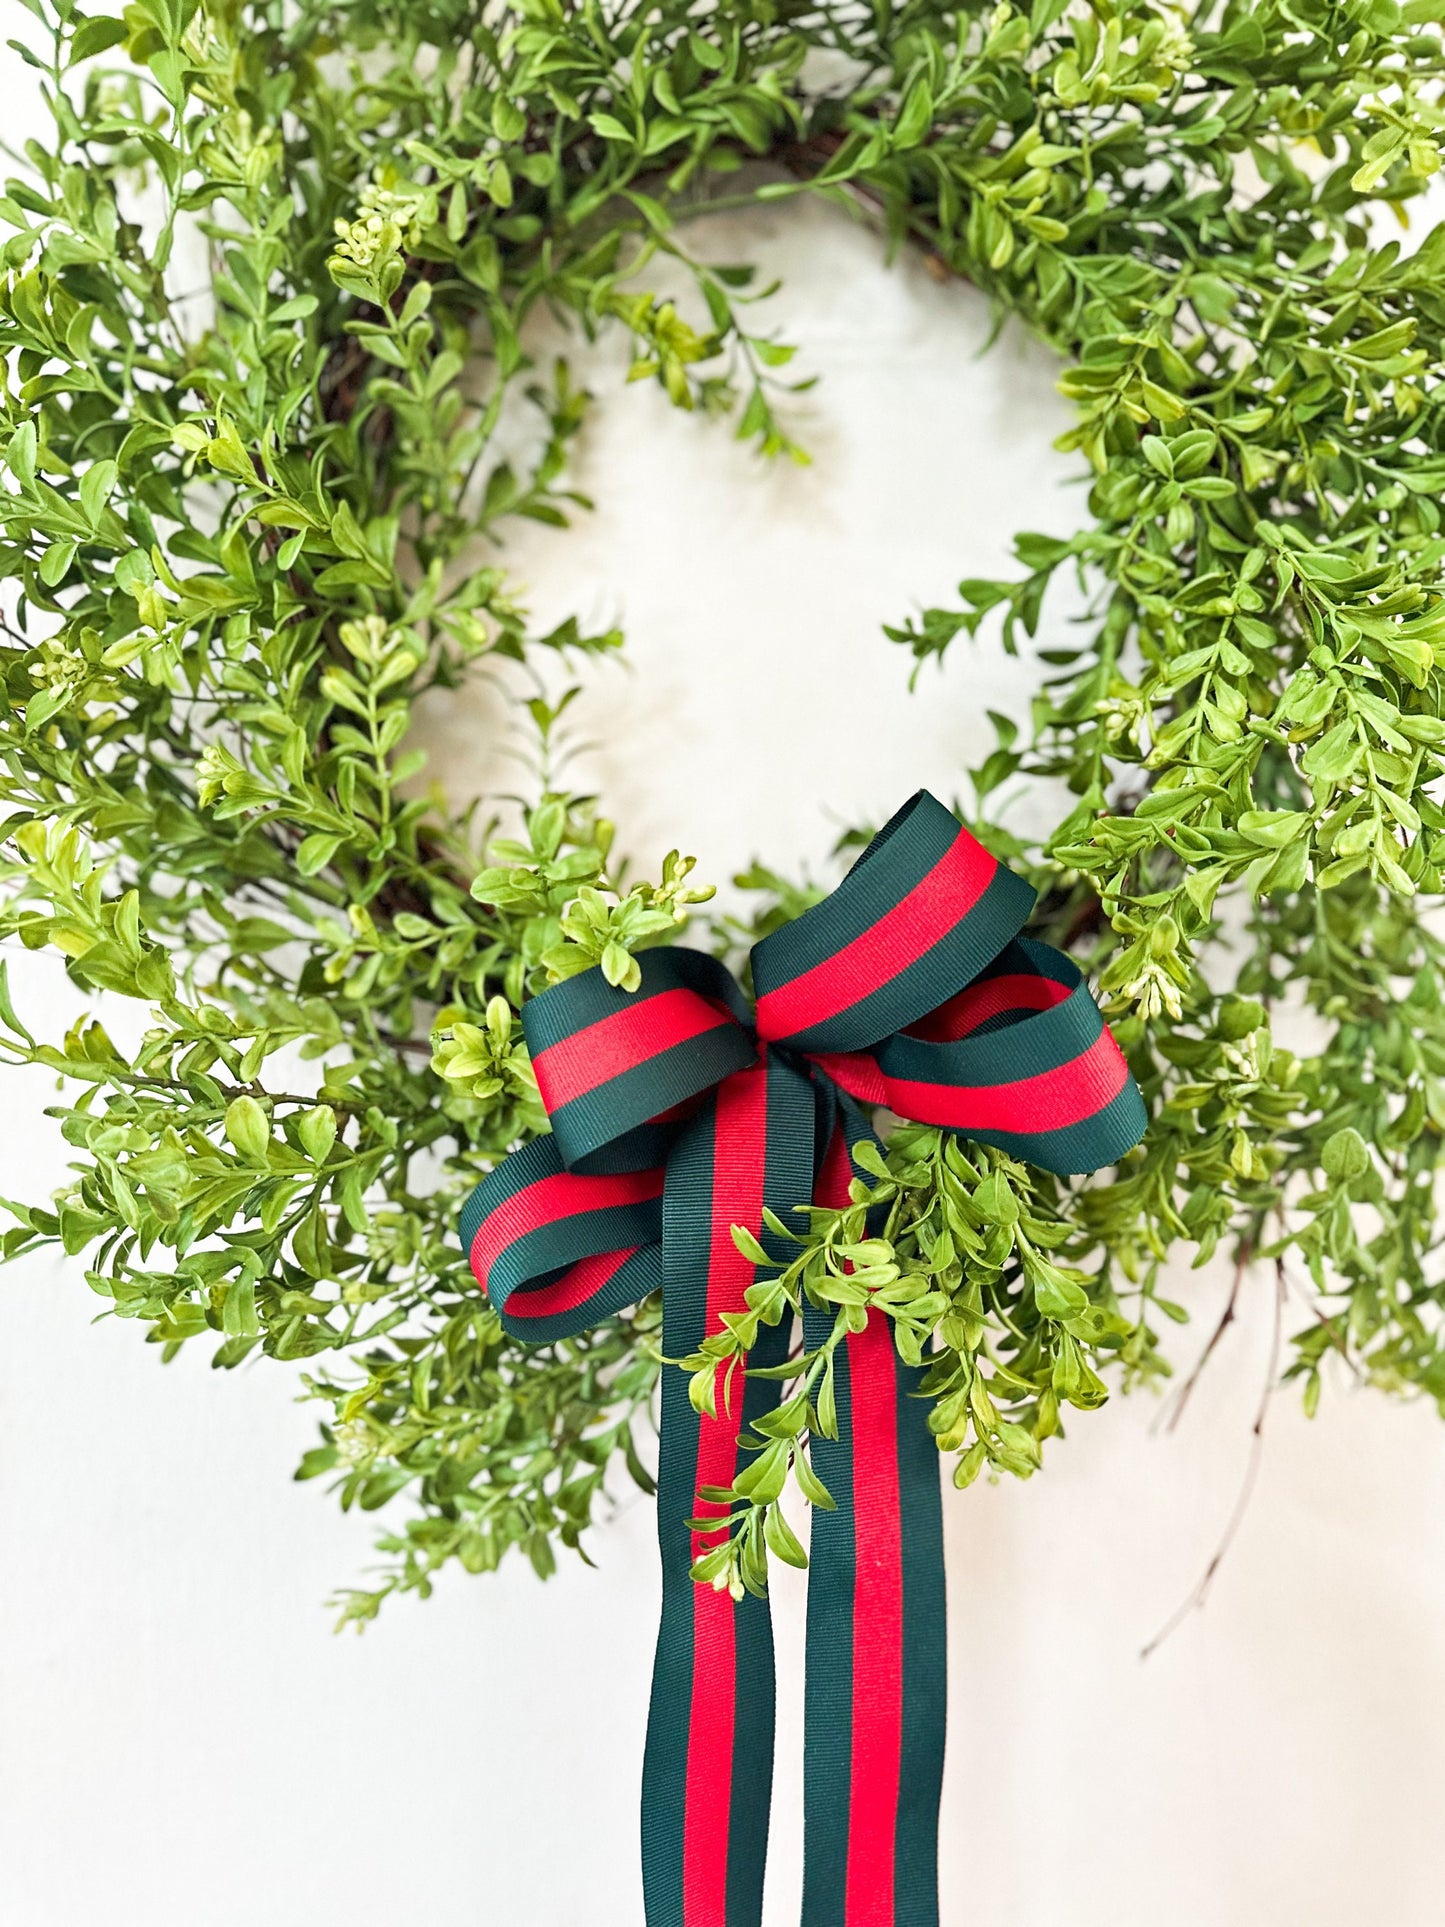 Faux Boxwood Wreath with Red and Green Striped Bow